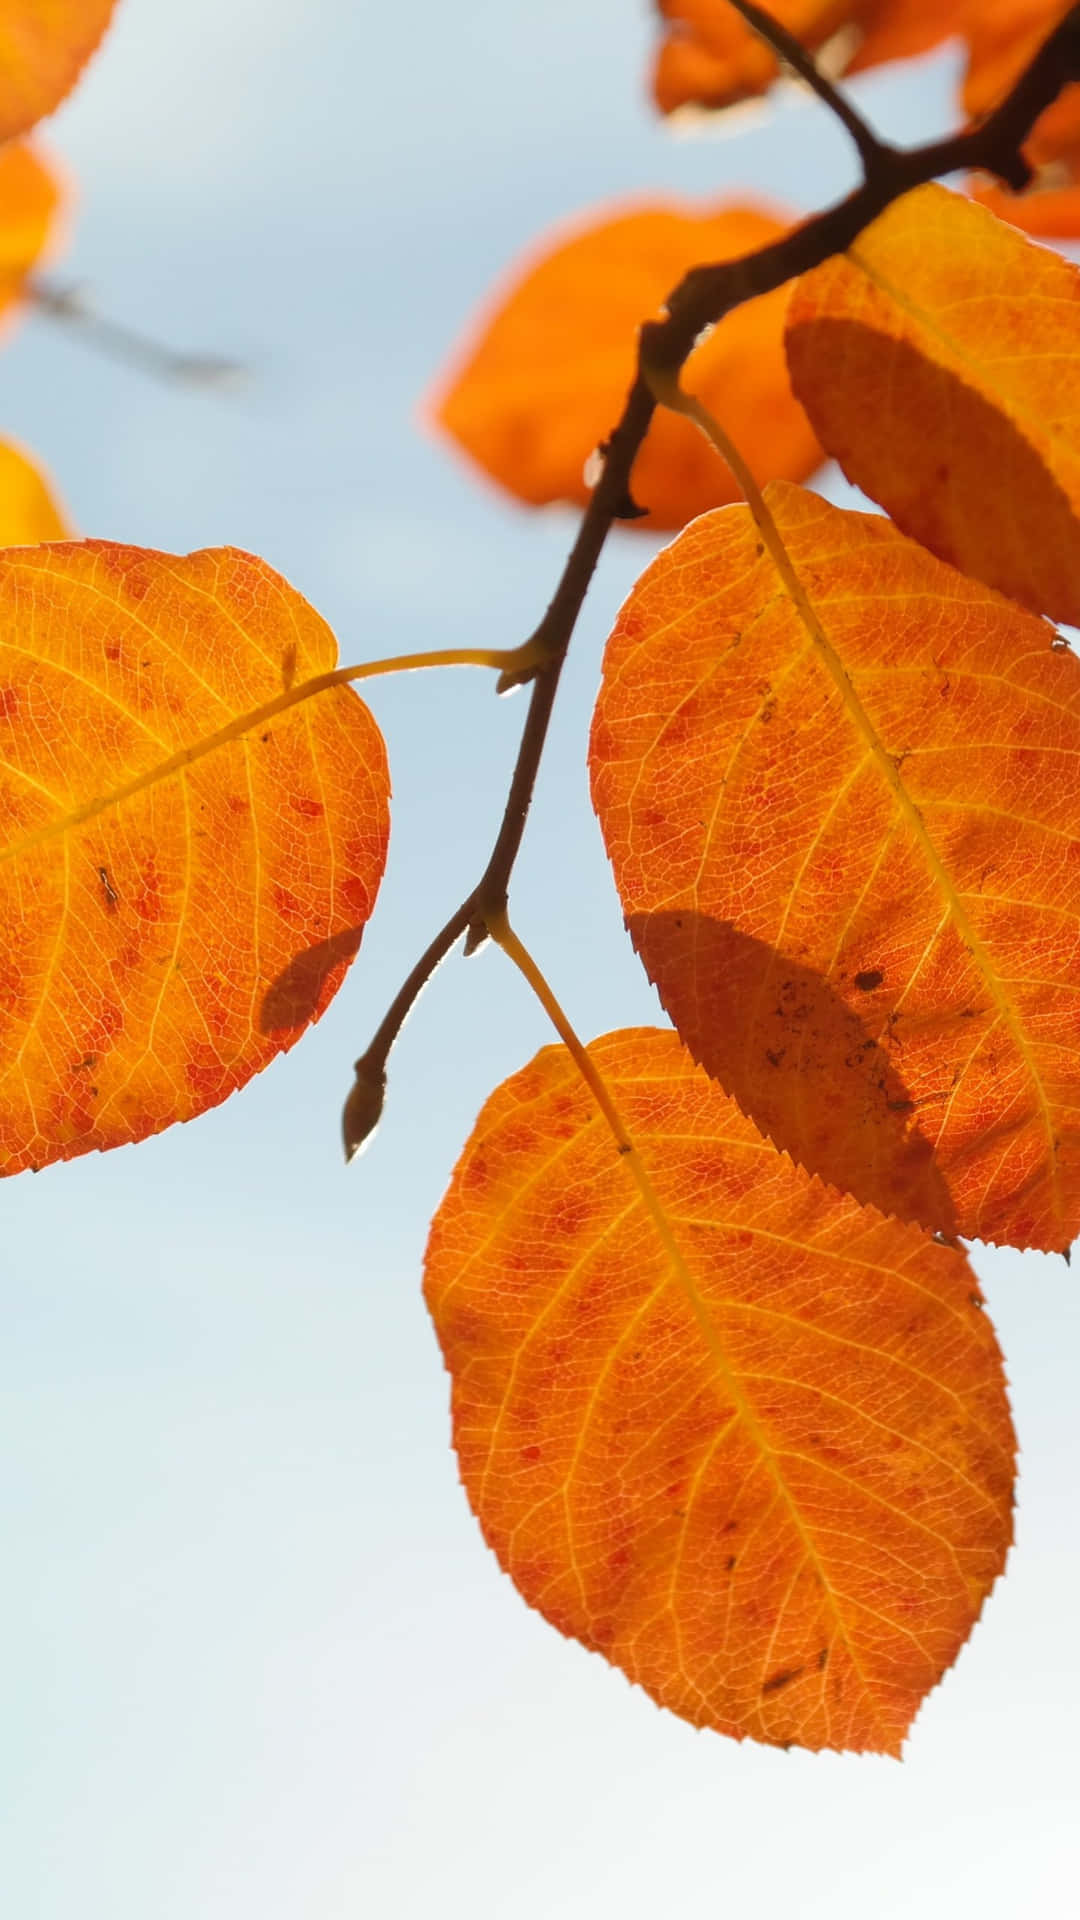 Autumn Leaves On A Branch Wallpaper